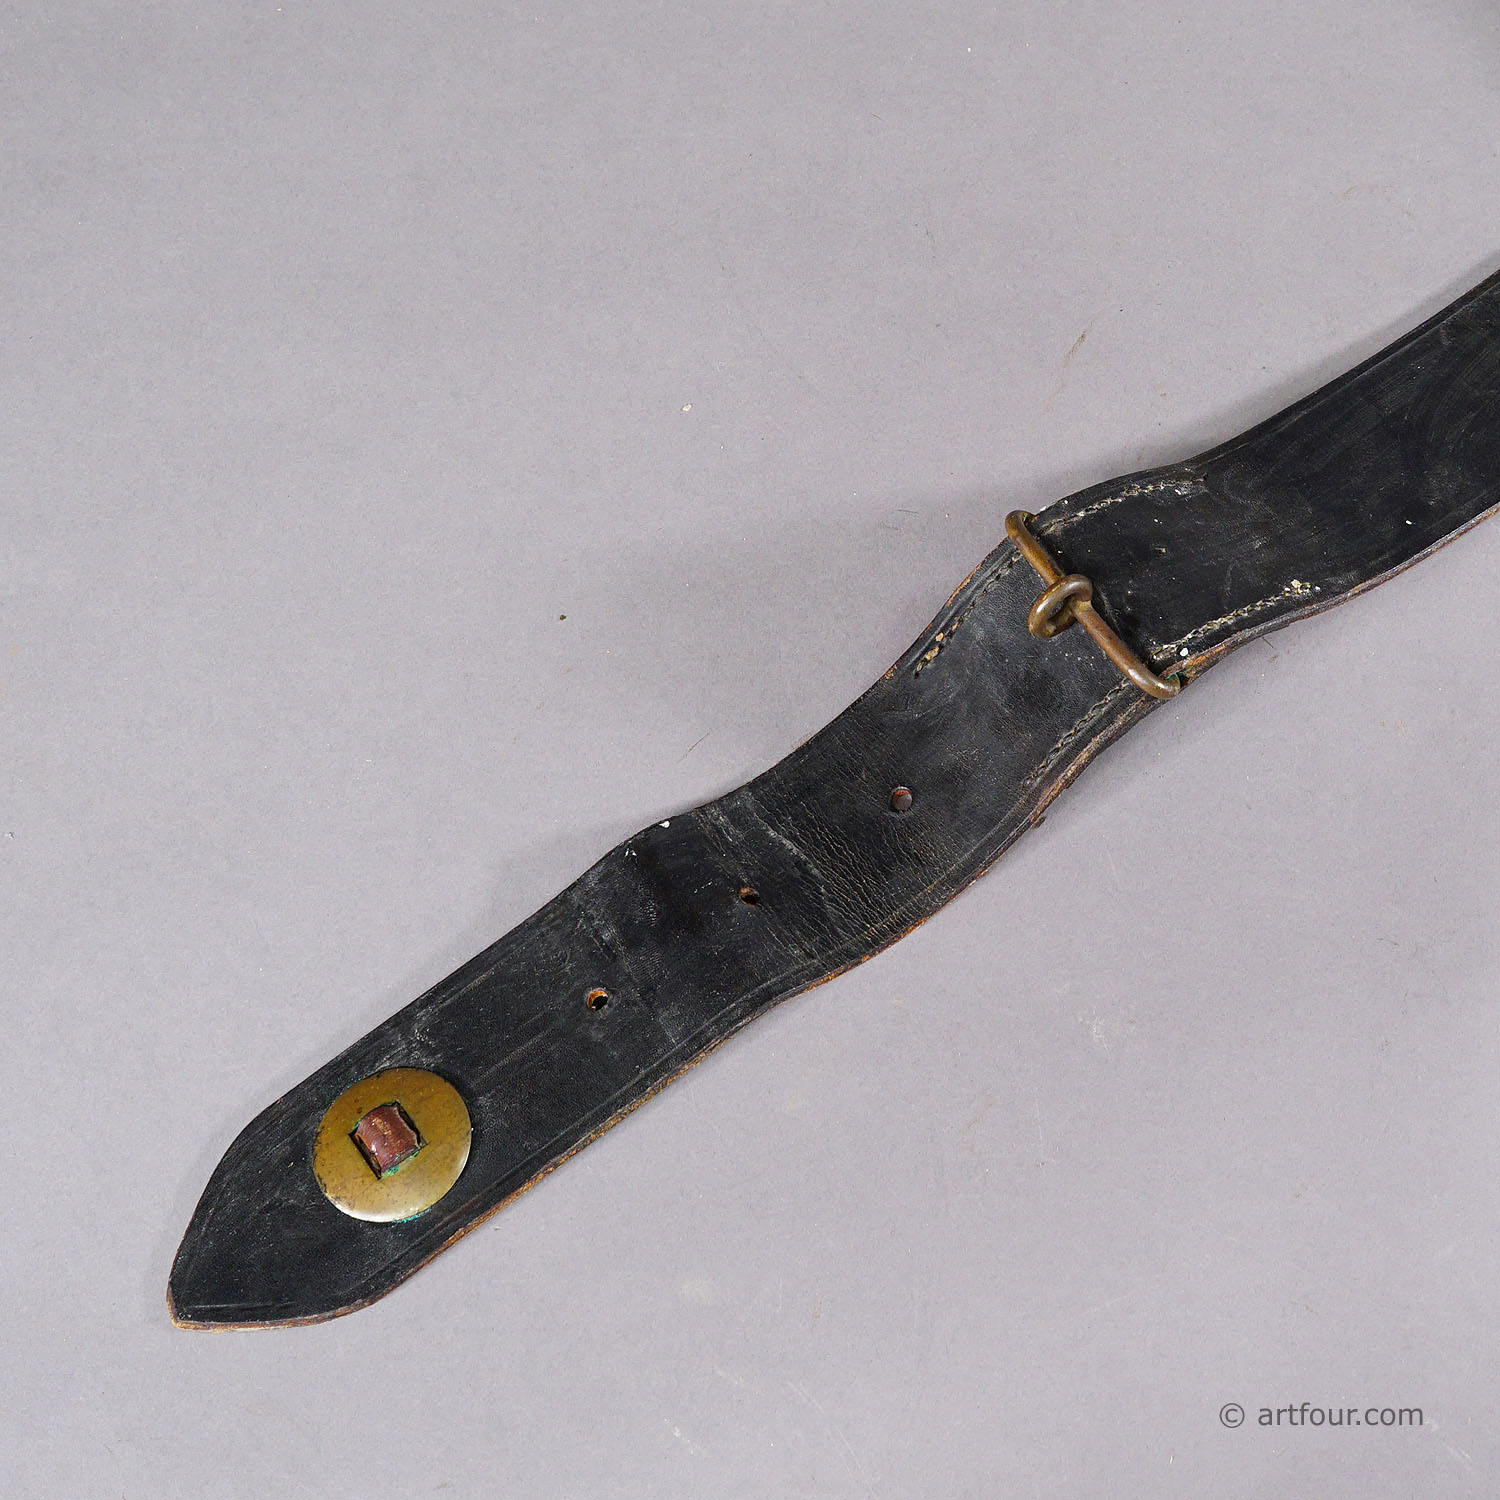 Antique Leather Strap with Six Casted Cattle Bells, Switzerland ca. 1900s